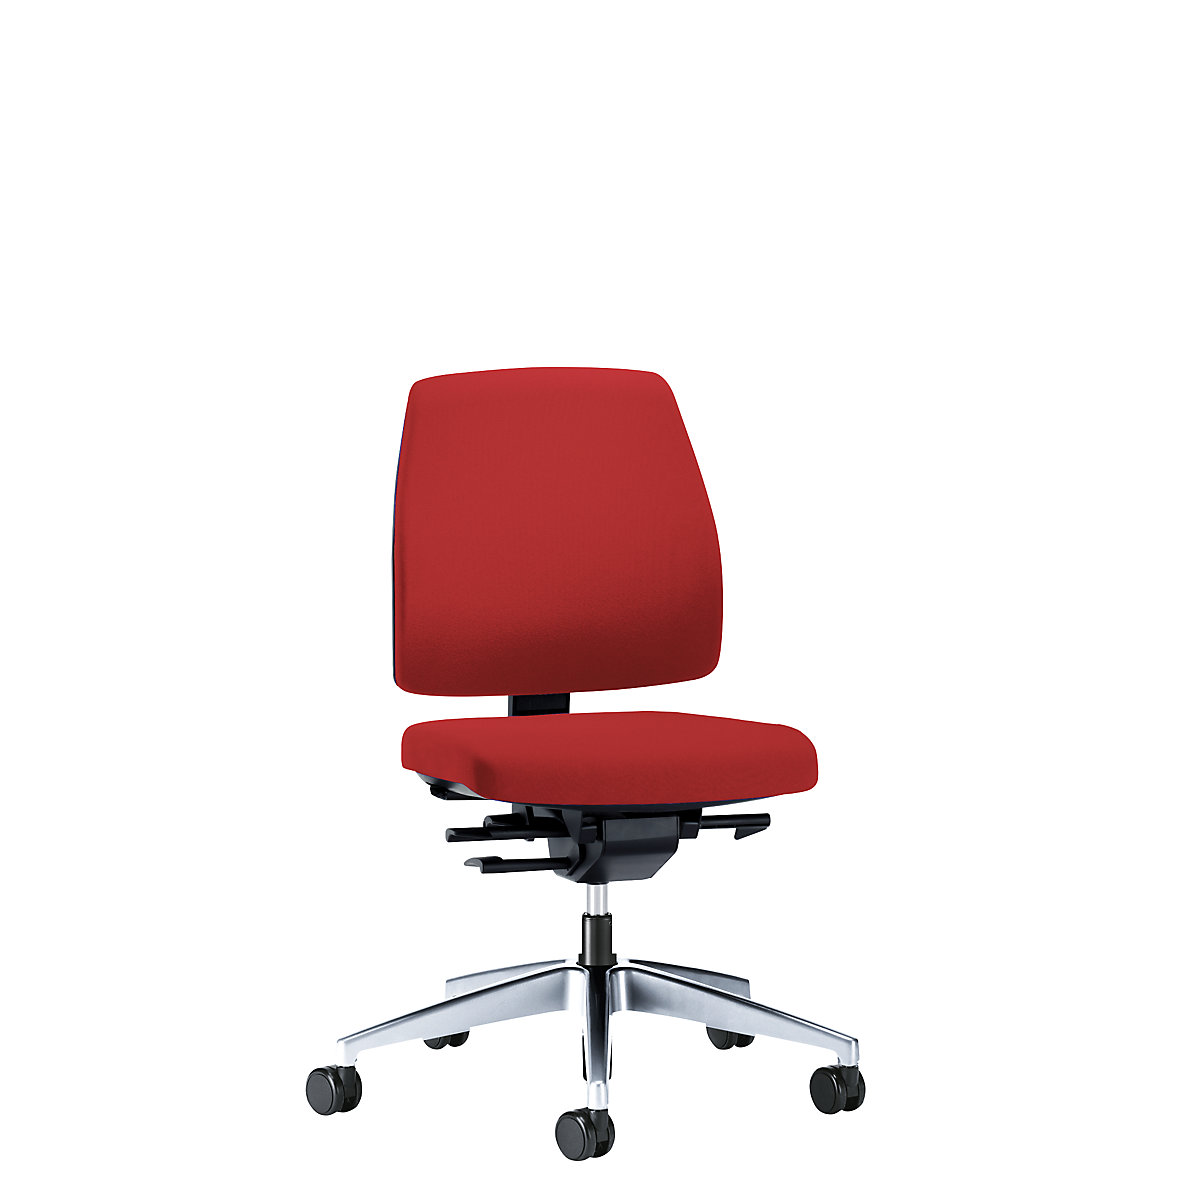 GOAL office swivel chair, back rest height 430 mm – interstuhl, polished frame, with soft castors, flame red, seat depth 410 mm-4